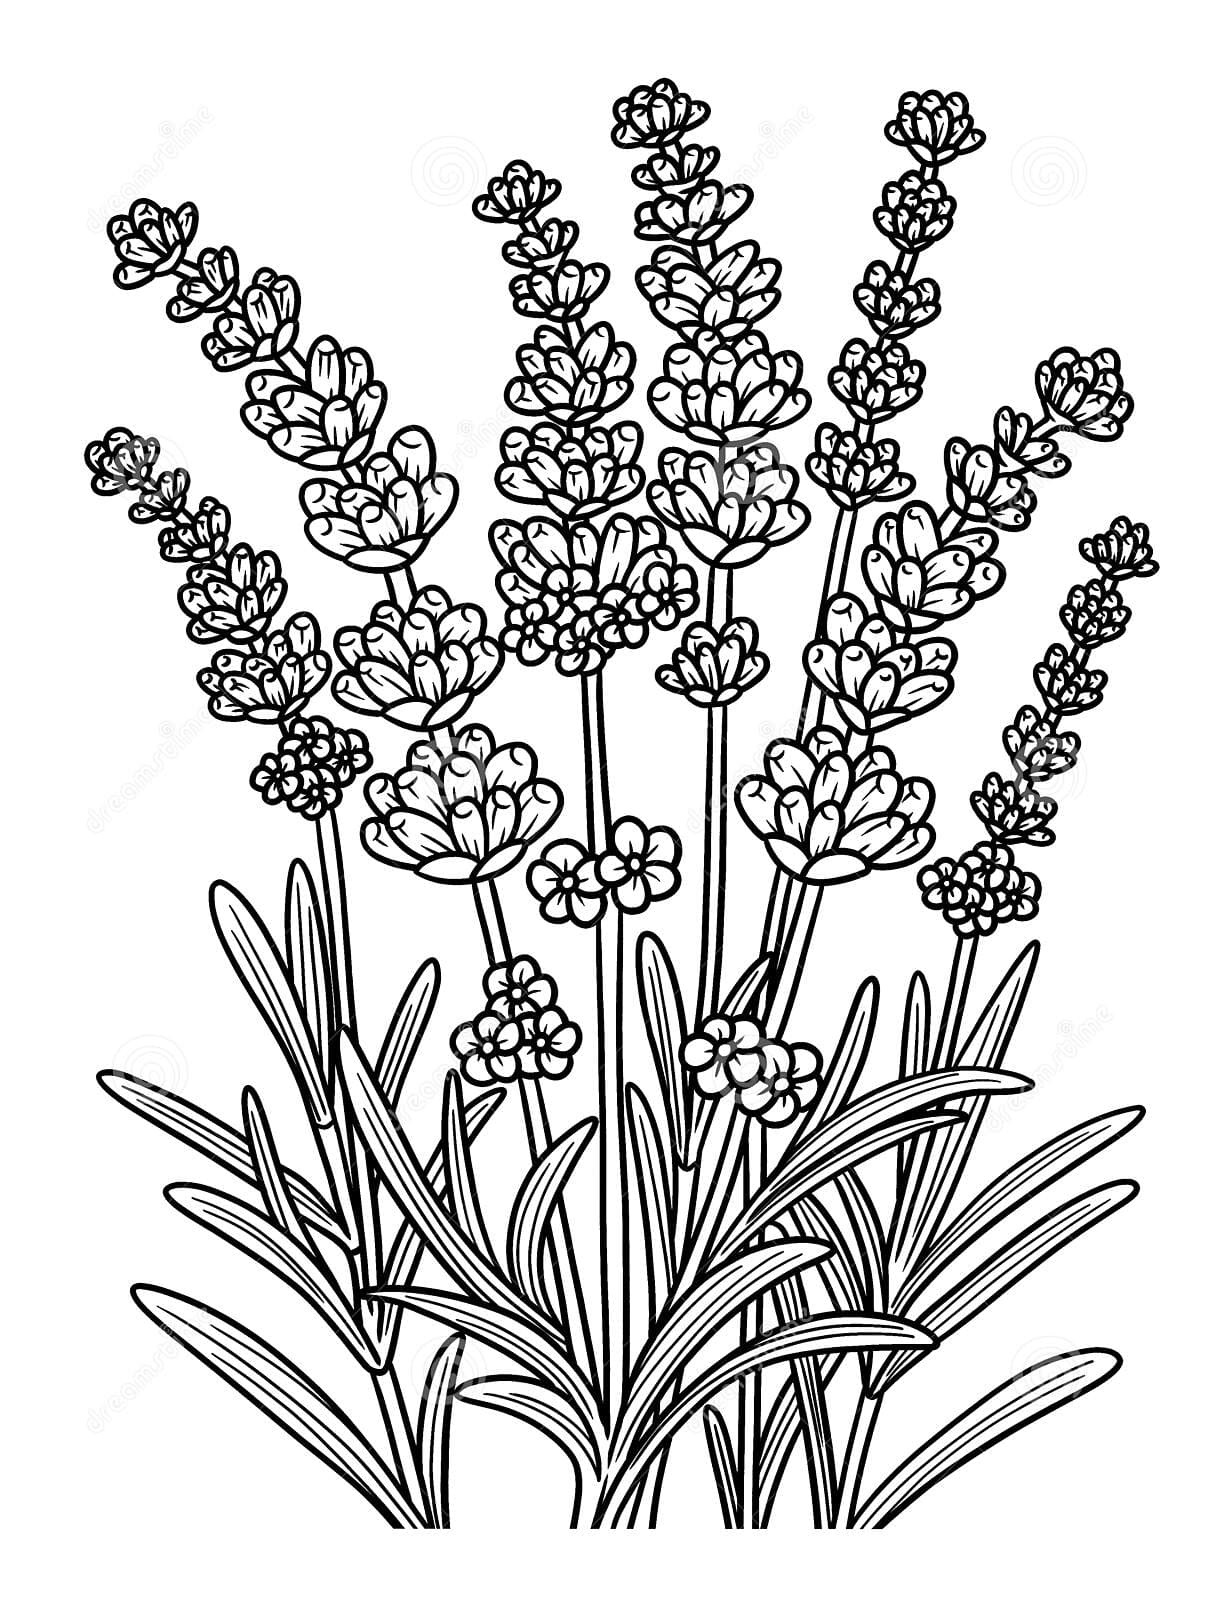 Lavender Flower Coloring Page For Adults